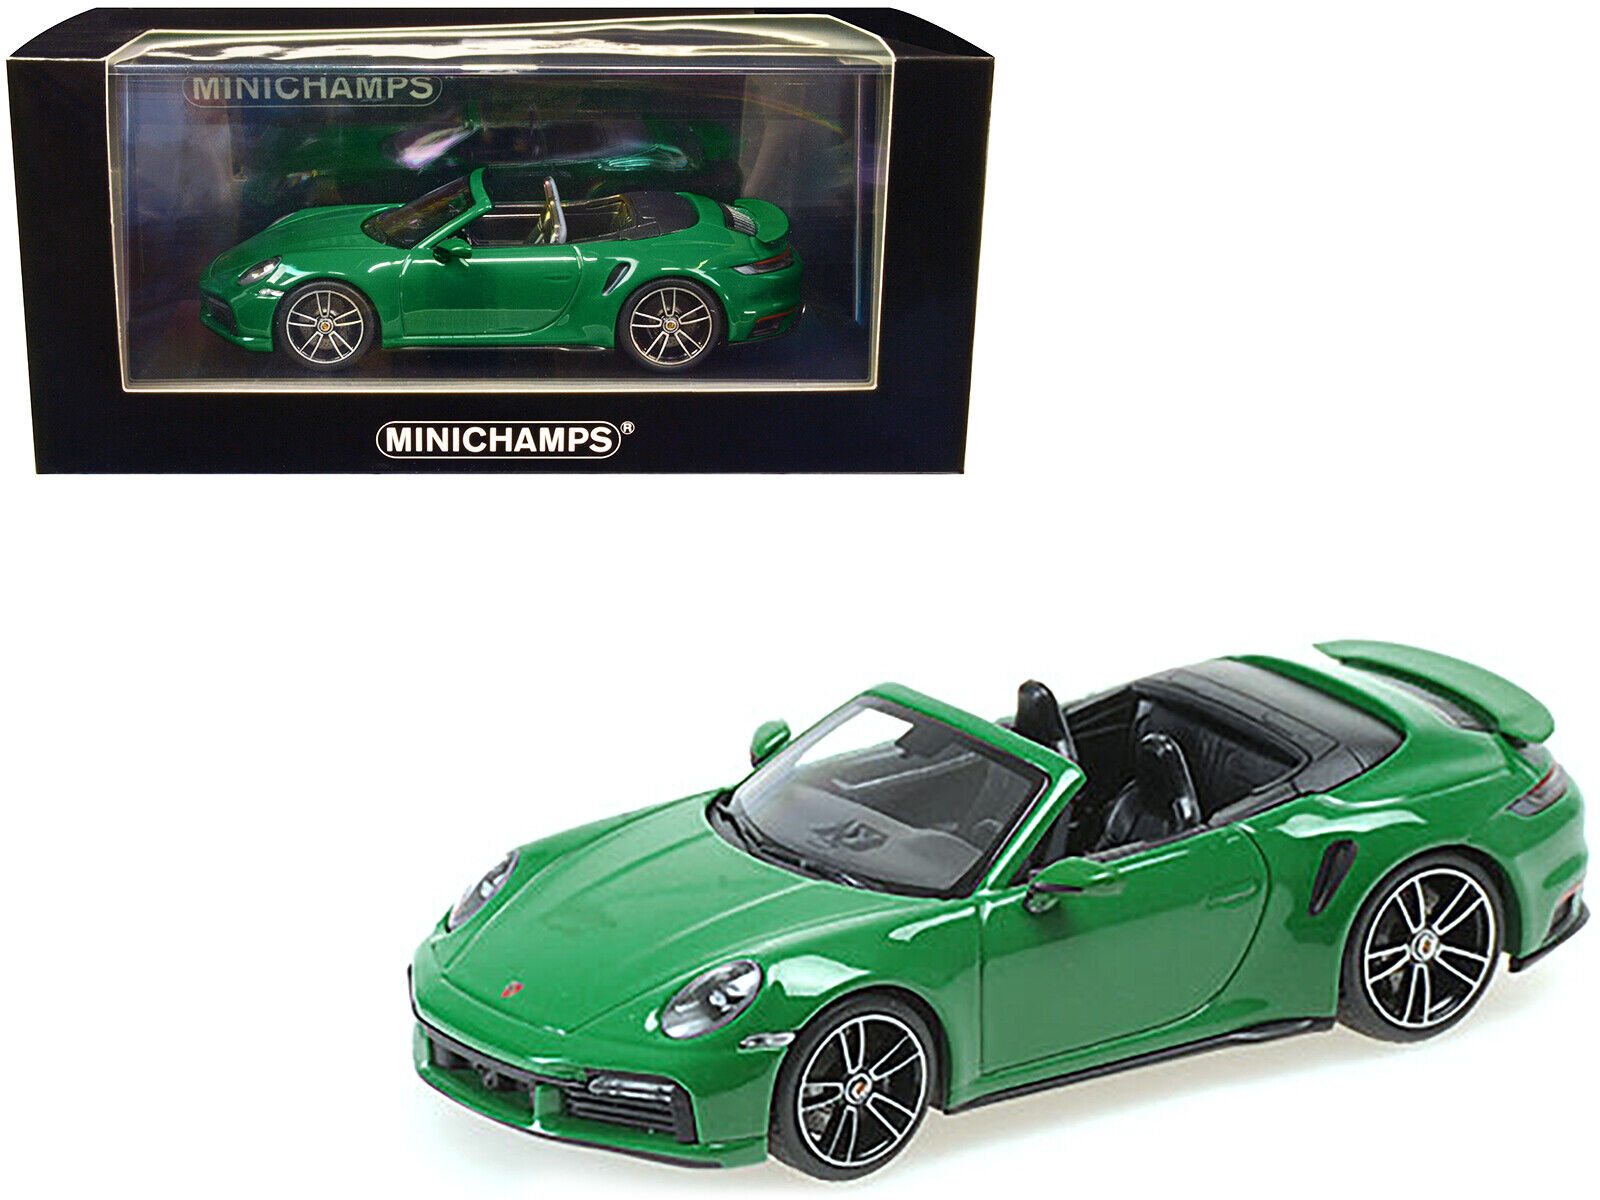 2020 Porsche 911 Turbo S Cabriolet Green Limited Edition to 504 pieces Worldwide